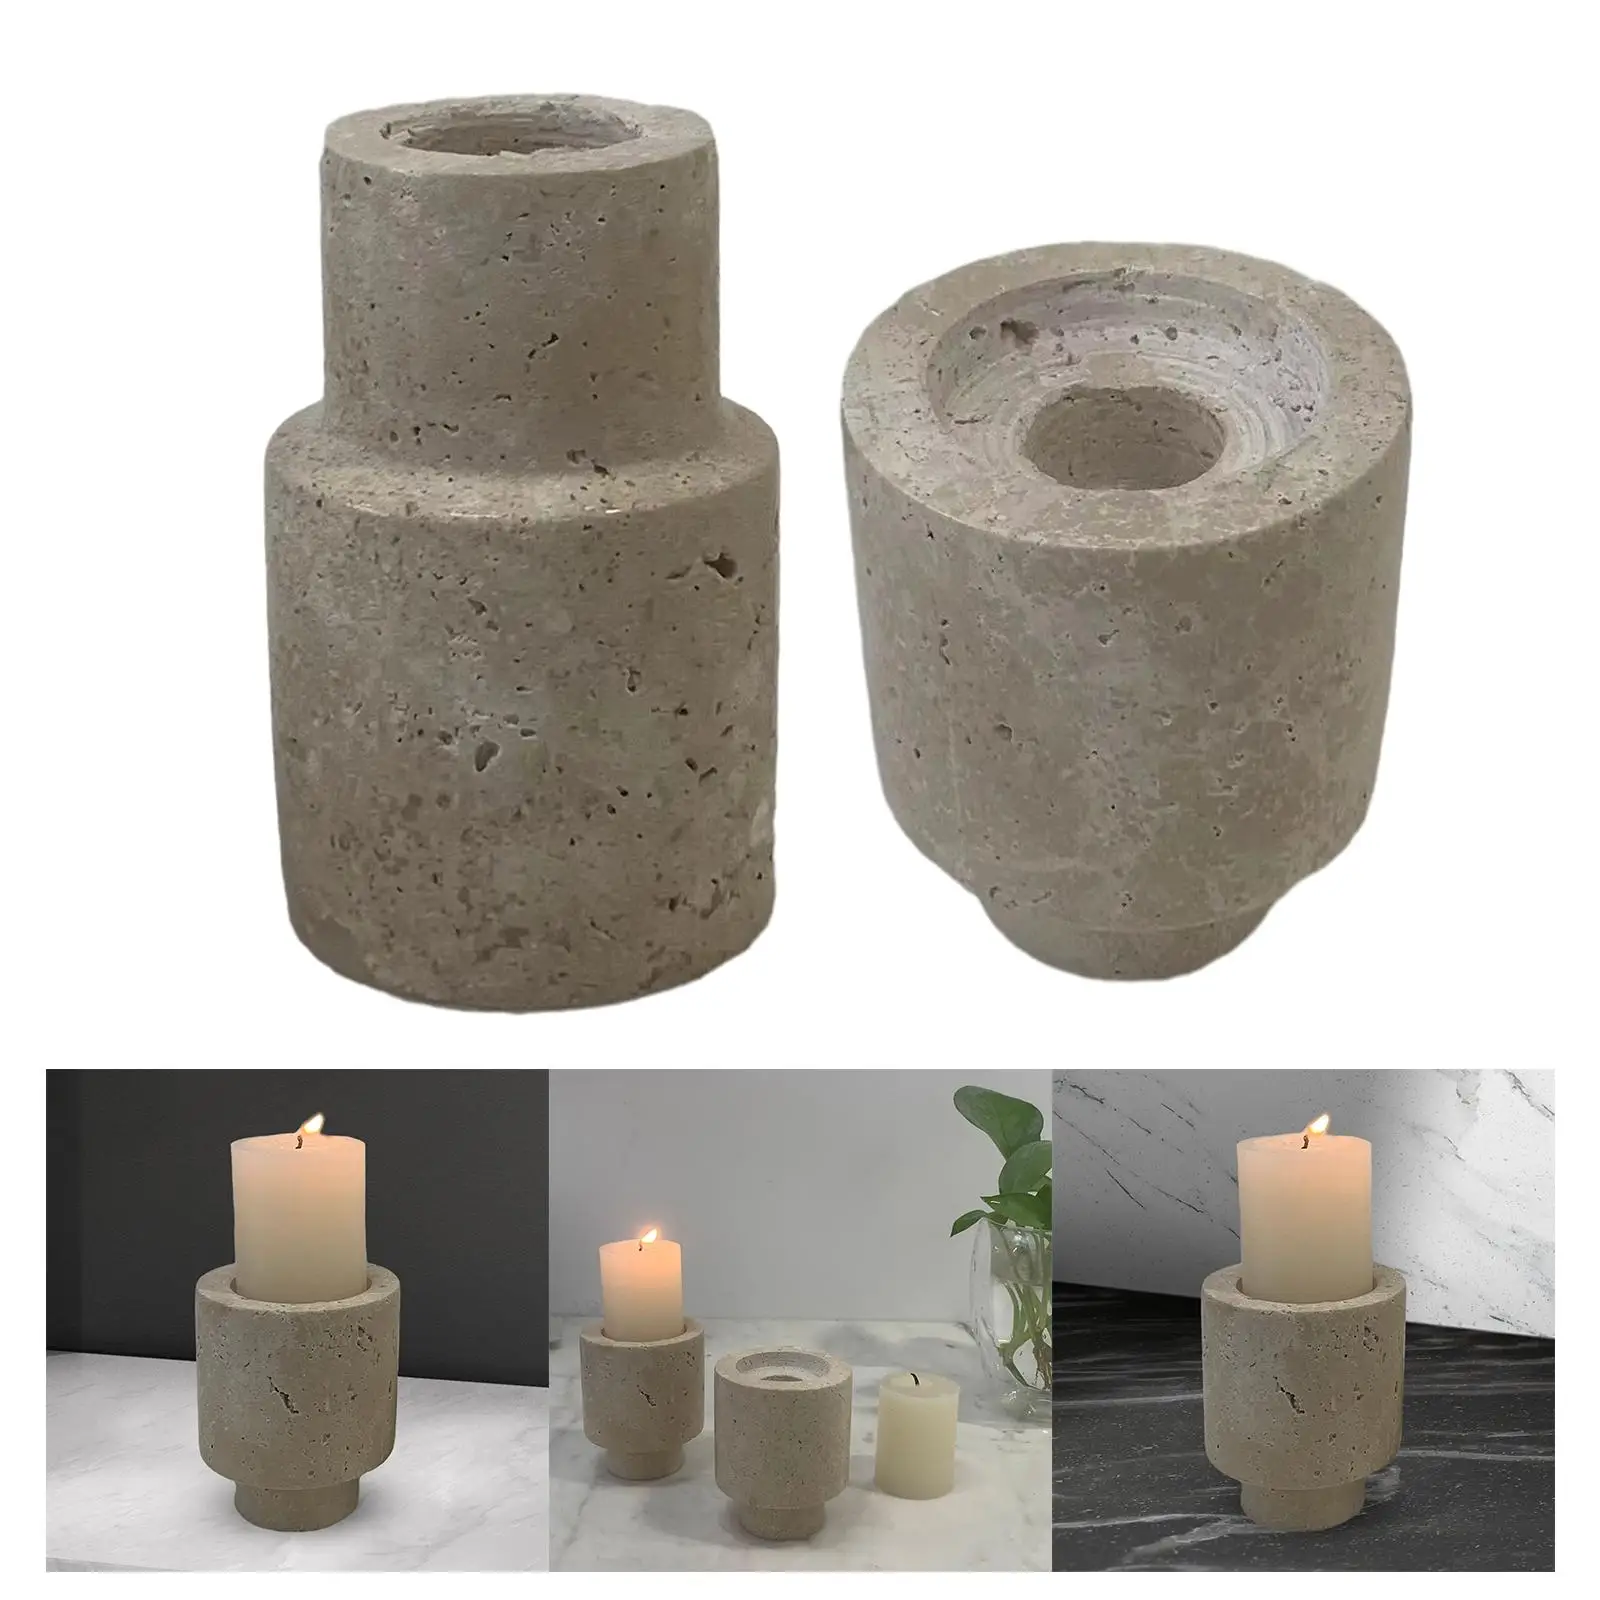 Candlestick Holders Candle Tray Rustic Candle Holder Home Decor Table Centerpiece for Party Wedding Christmas Dinning Table